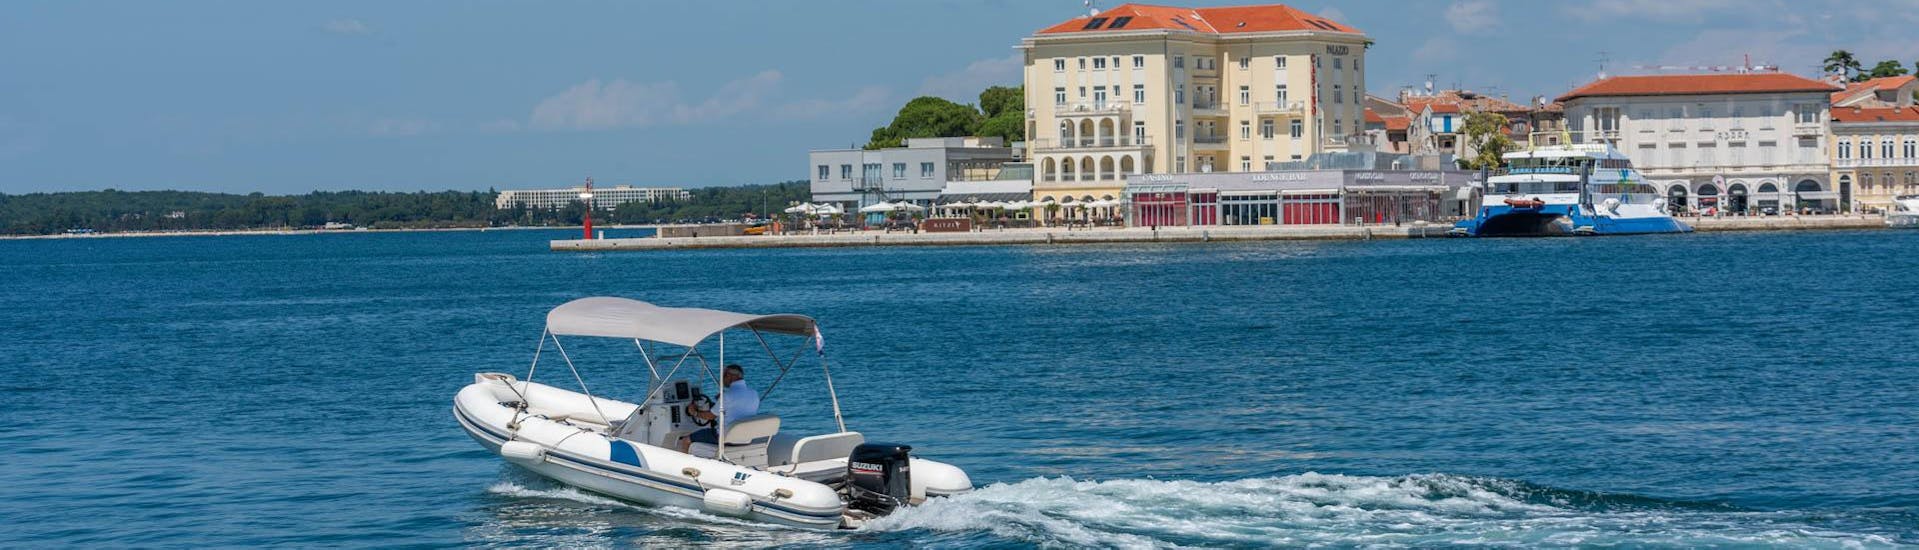 The boat is navigating during the Boat Rental in Poreč (up to 10 people) with Parentium Charter Poreč.